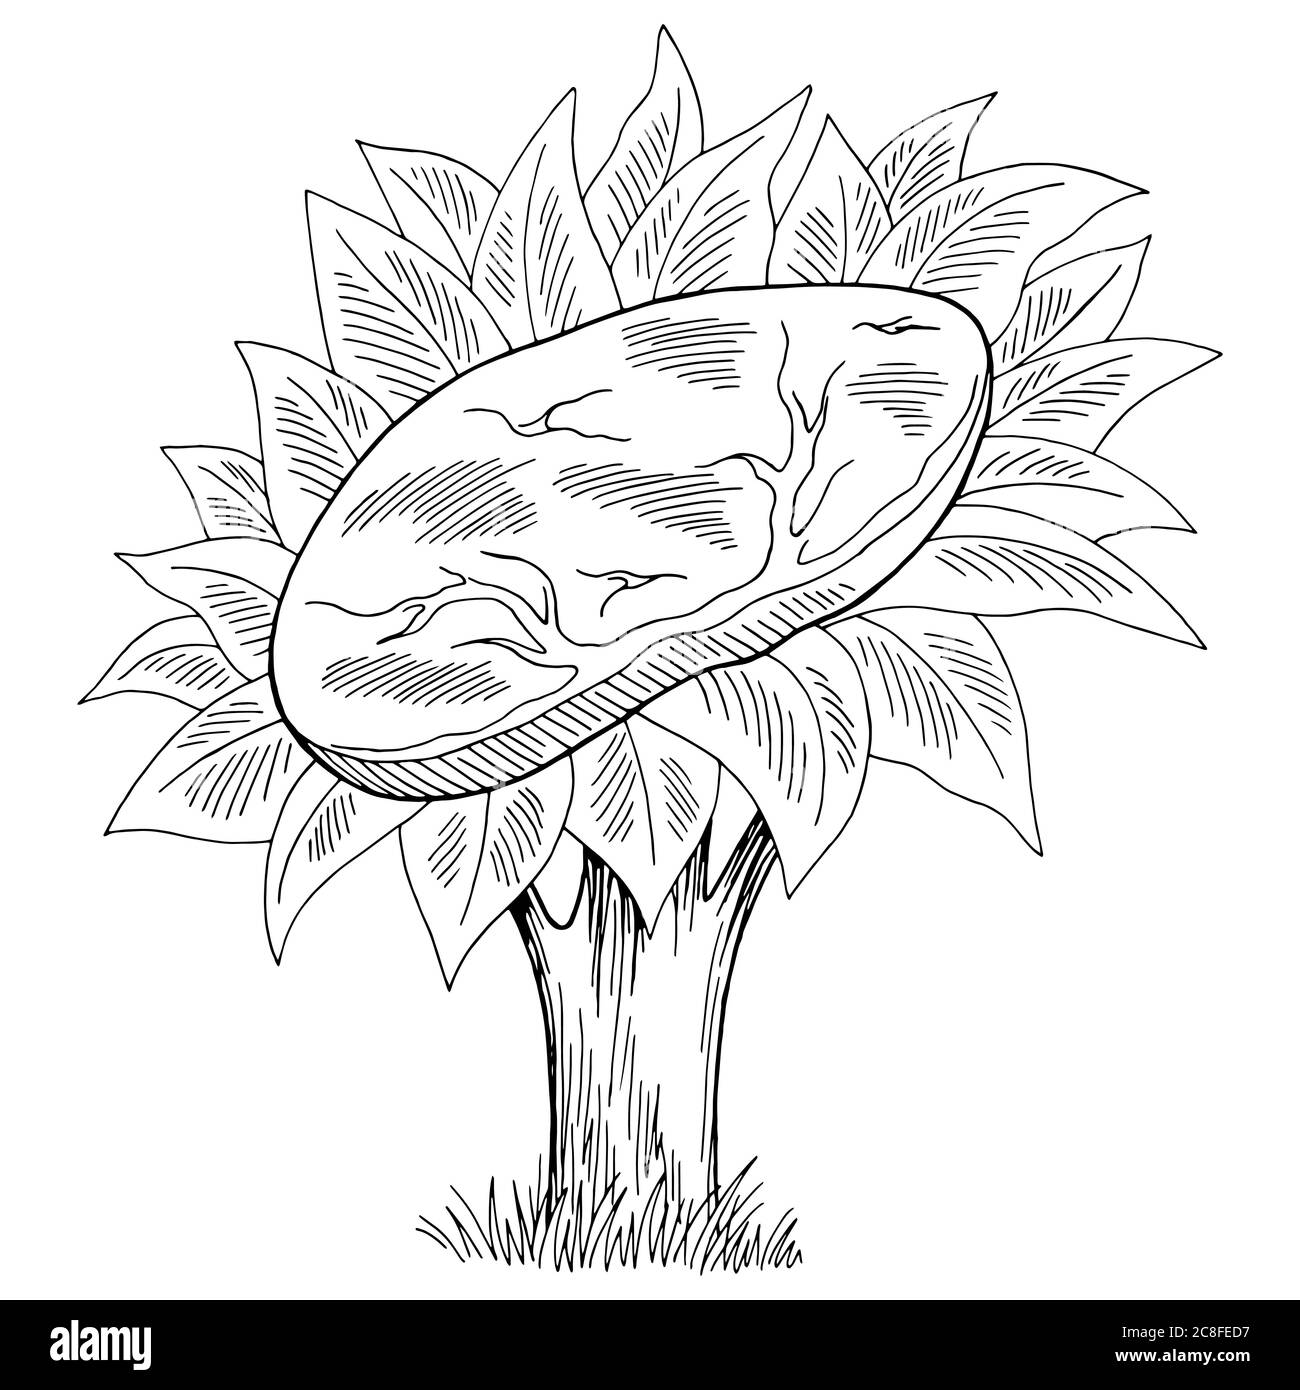 Plant vegan meat eco food tree graphic black white isolated sketch illustration vector Stock Vector